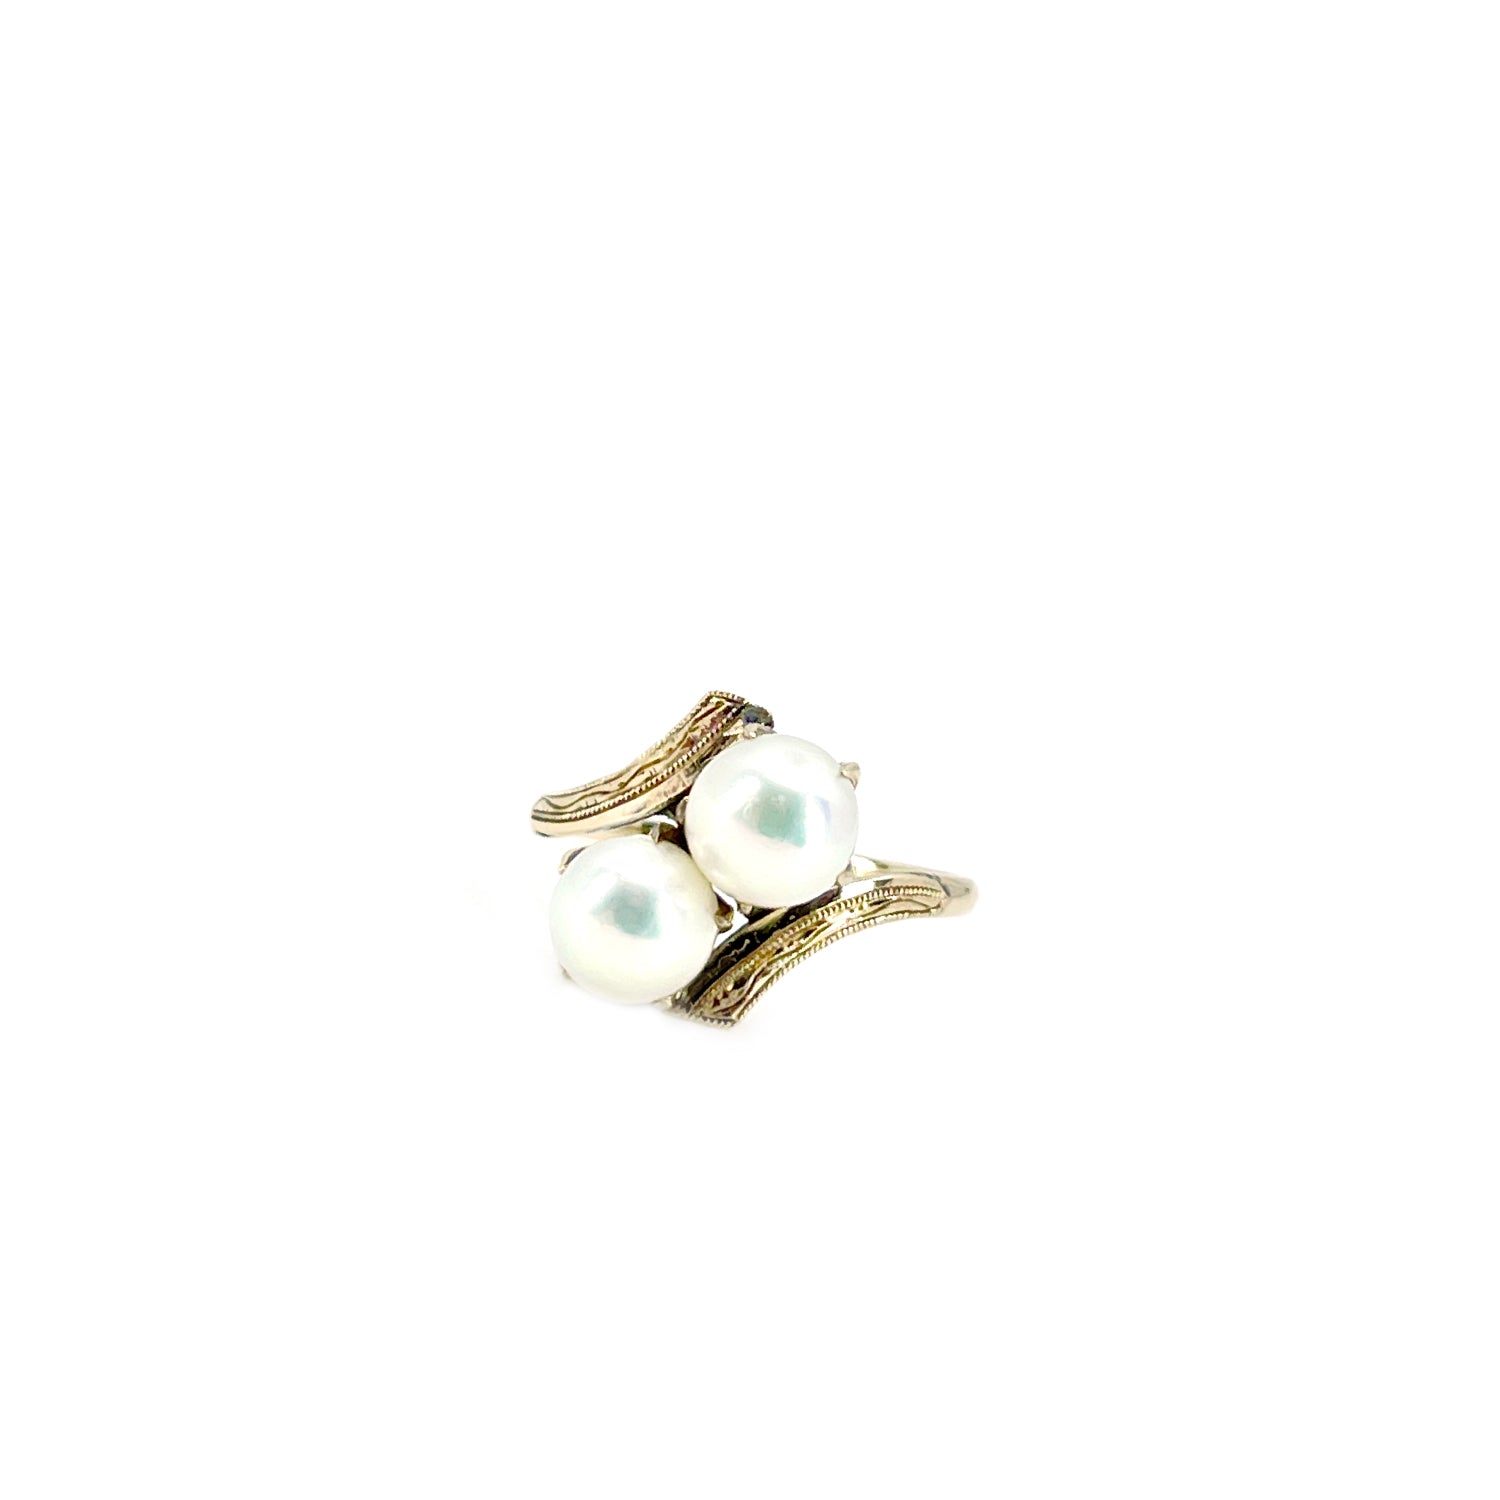 Claw Prong Victorian Vintage Japanese Saltwater Akoya Cultured Pearl Ring- 14K Yellow Gold Size 5